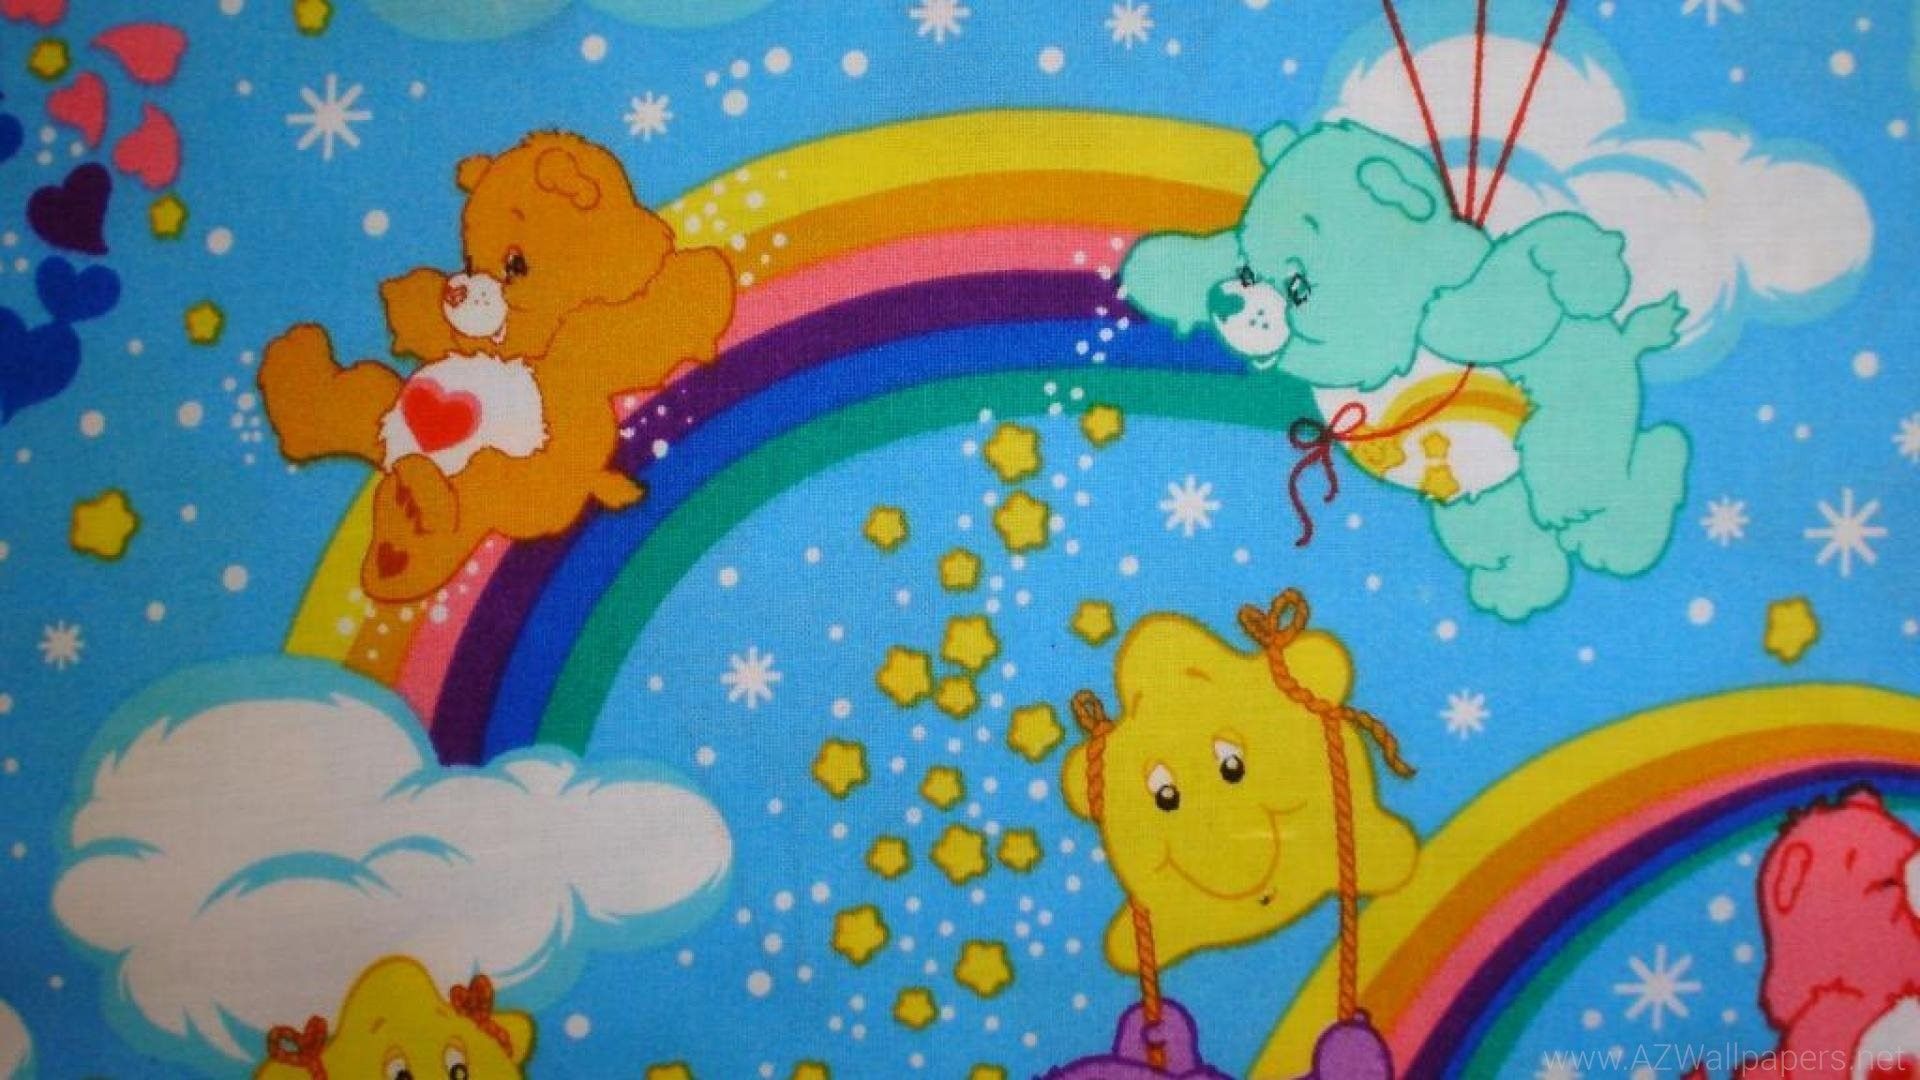 Care Bears Wallpaper Background